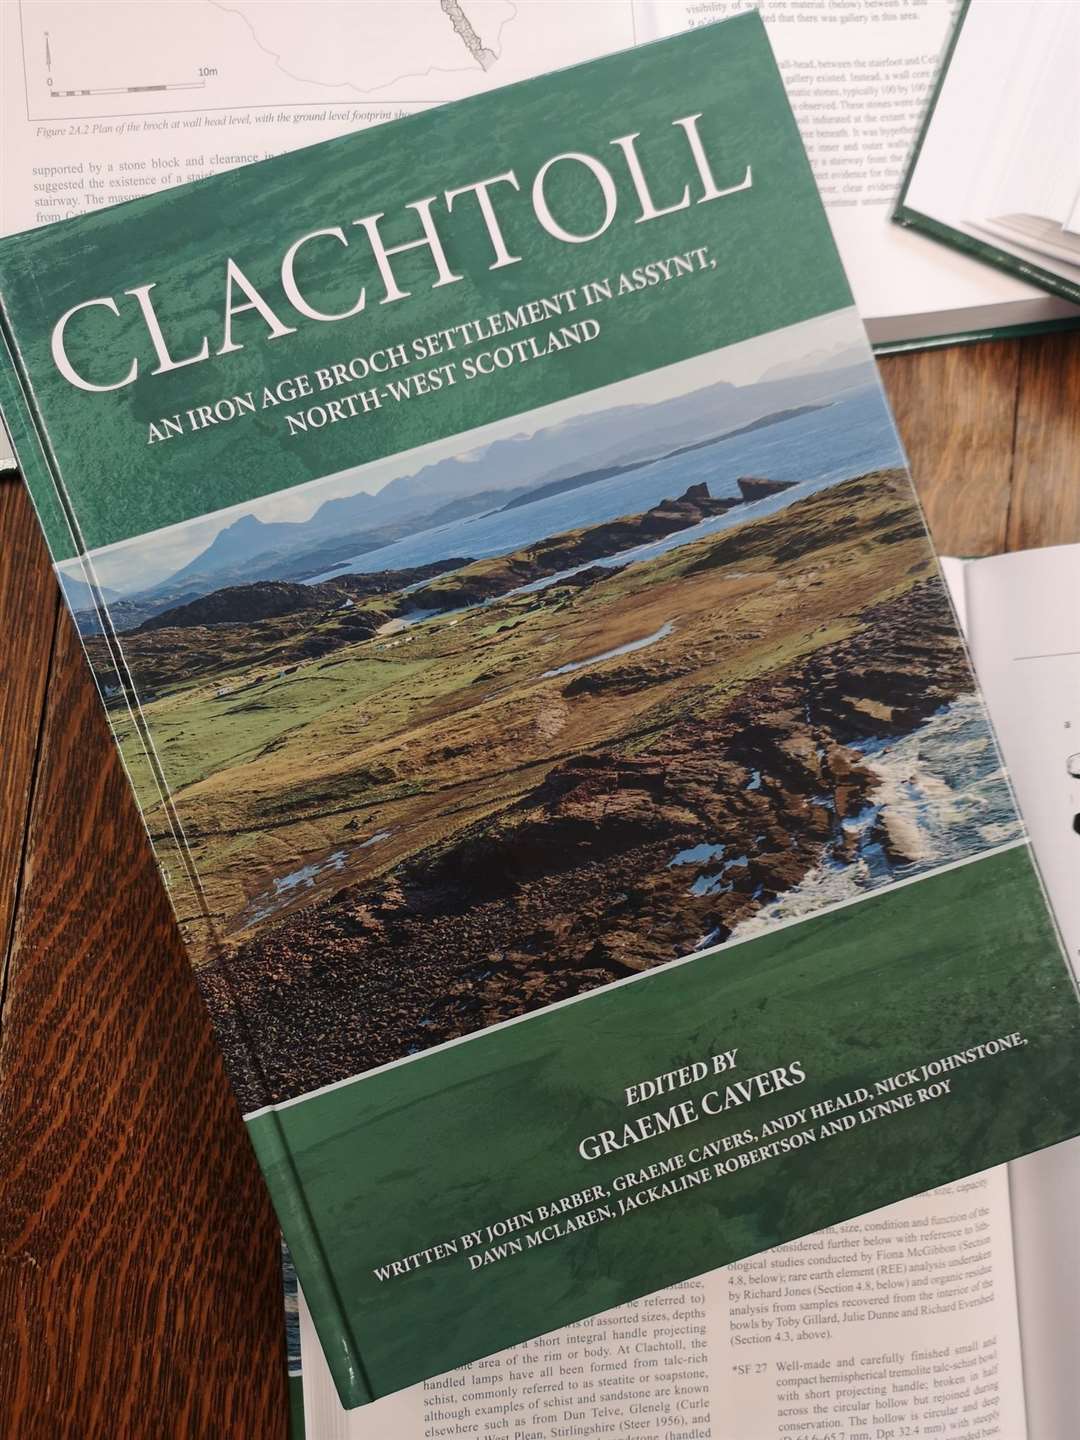 The new book is a study of the community excavation of Clachtoll Broch.